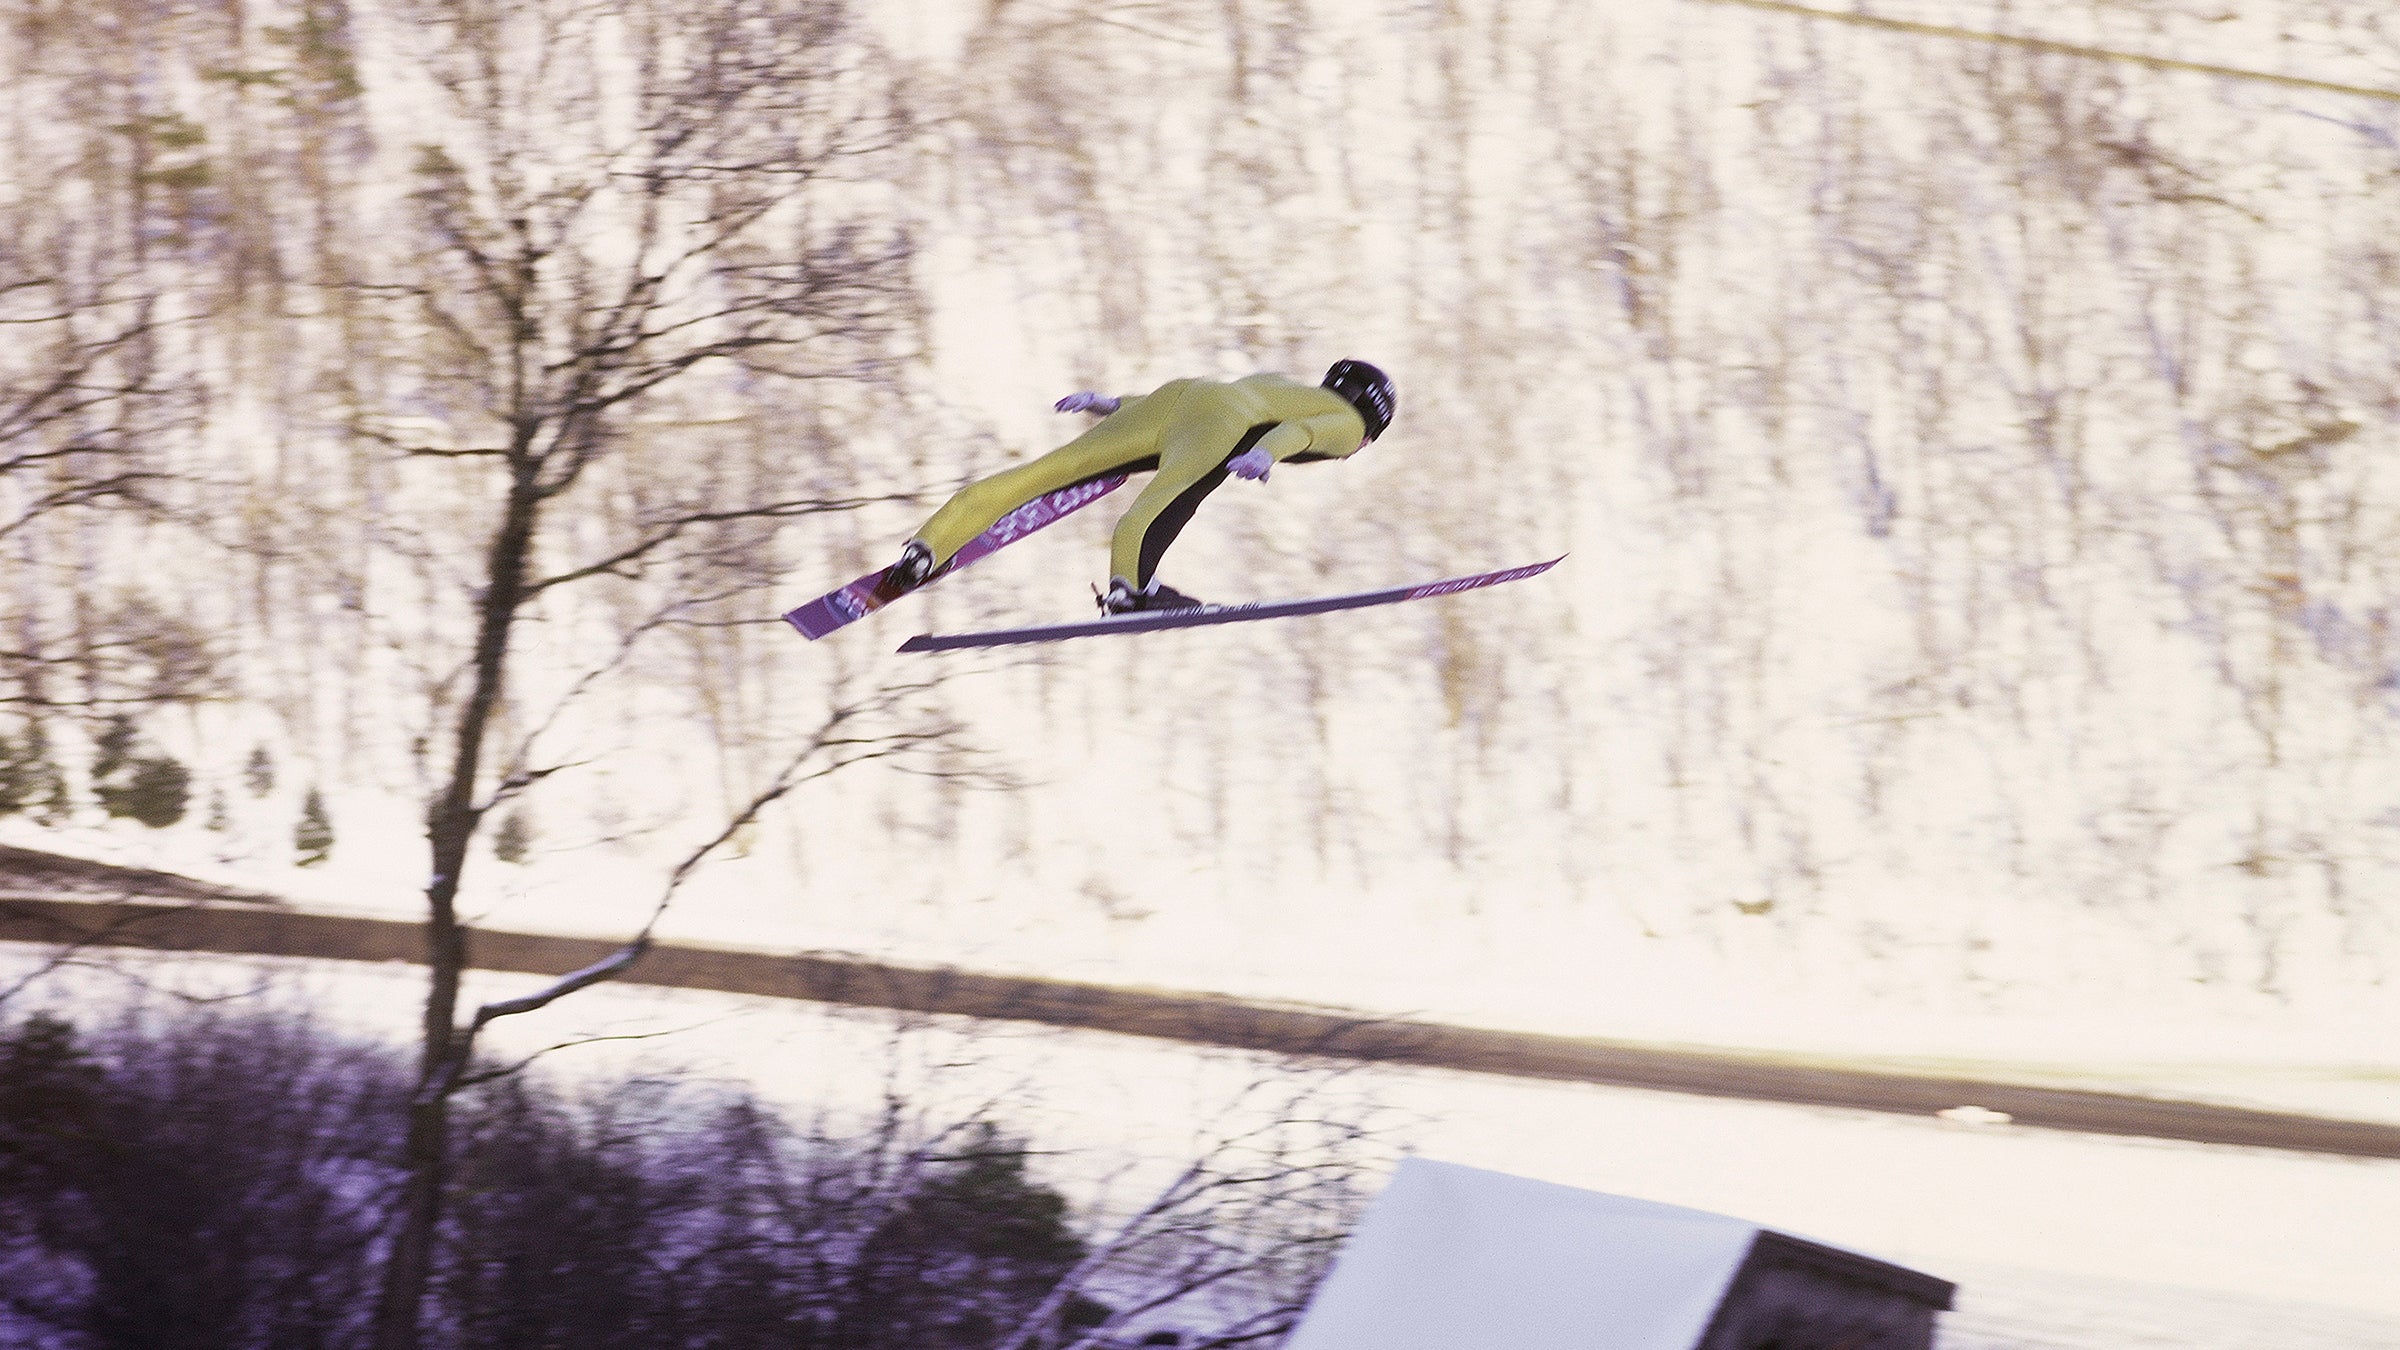 The Secret Culture of Ski-Jumping in the Midwest